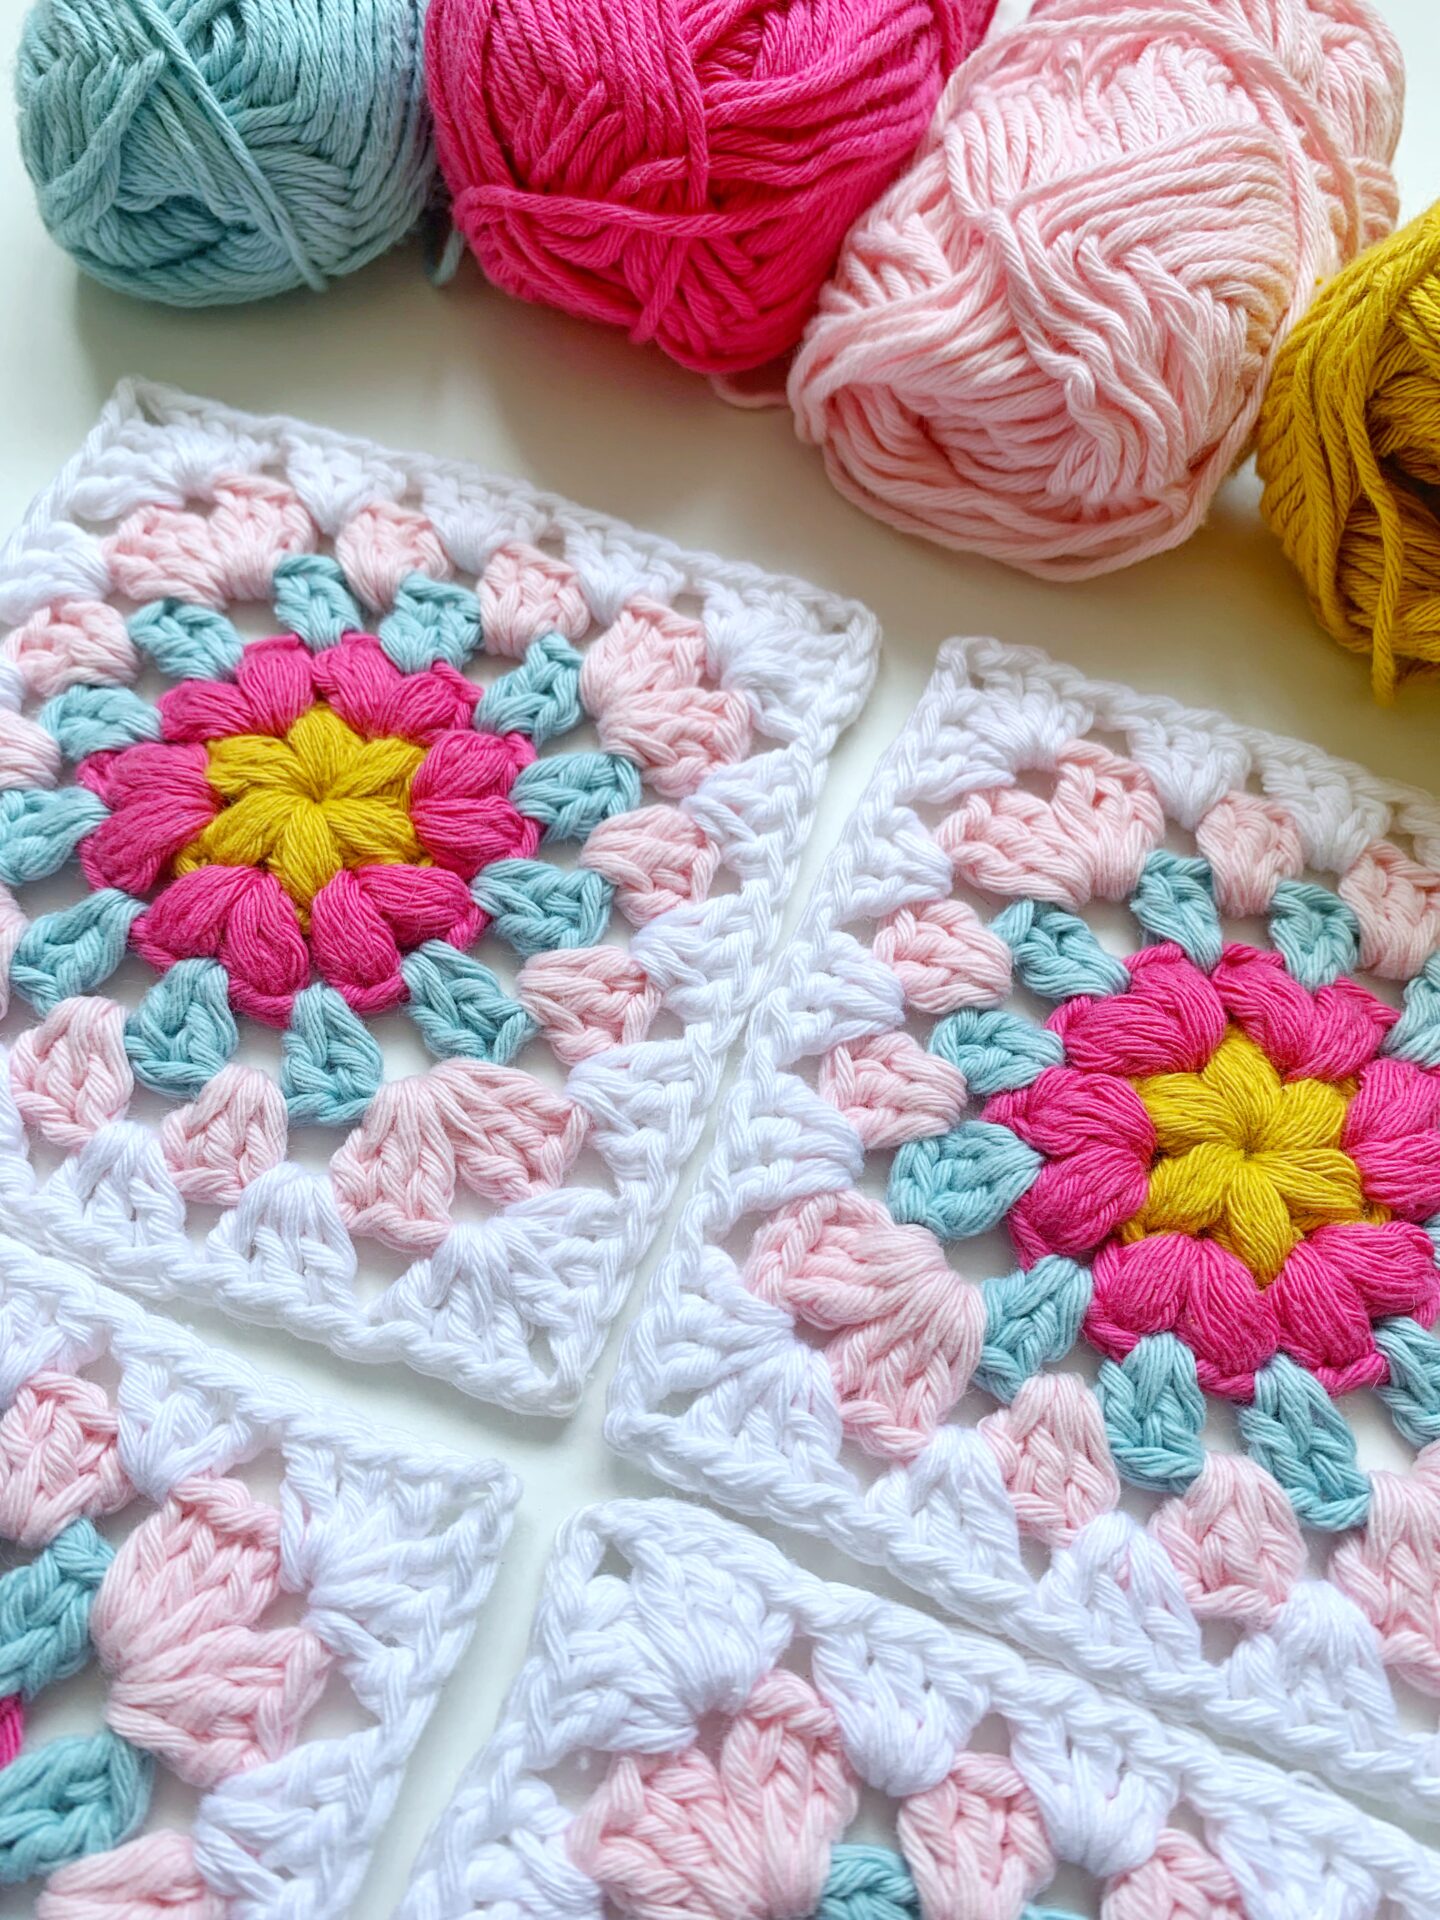 beginner friendly granny square by Clare M